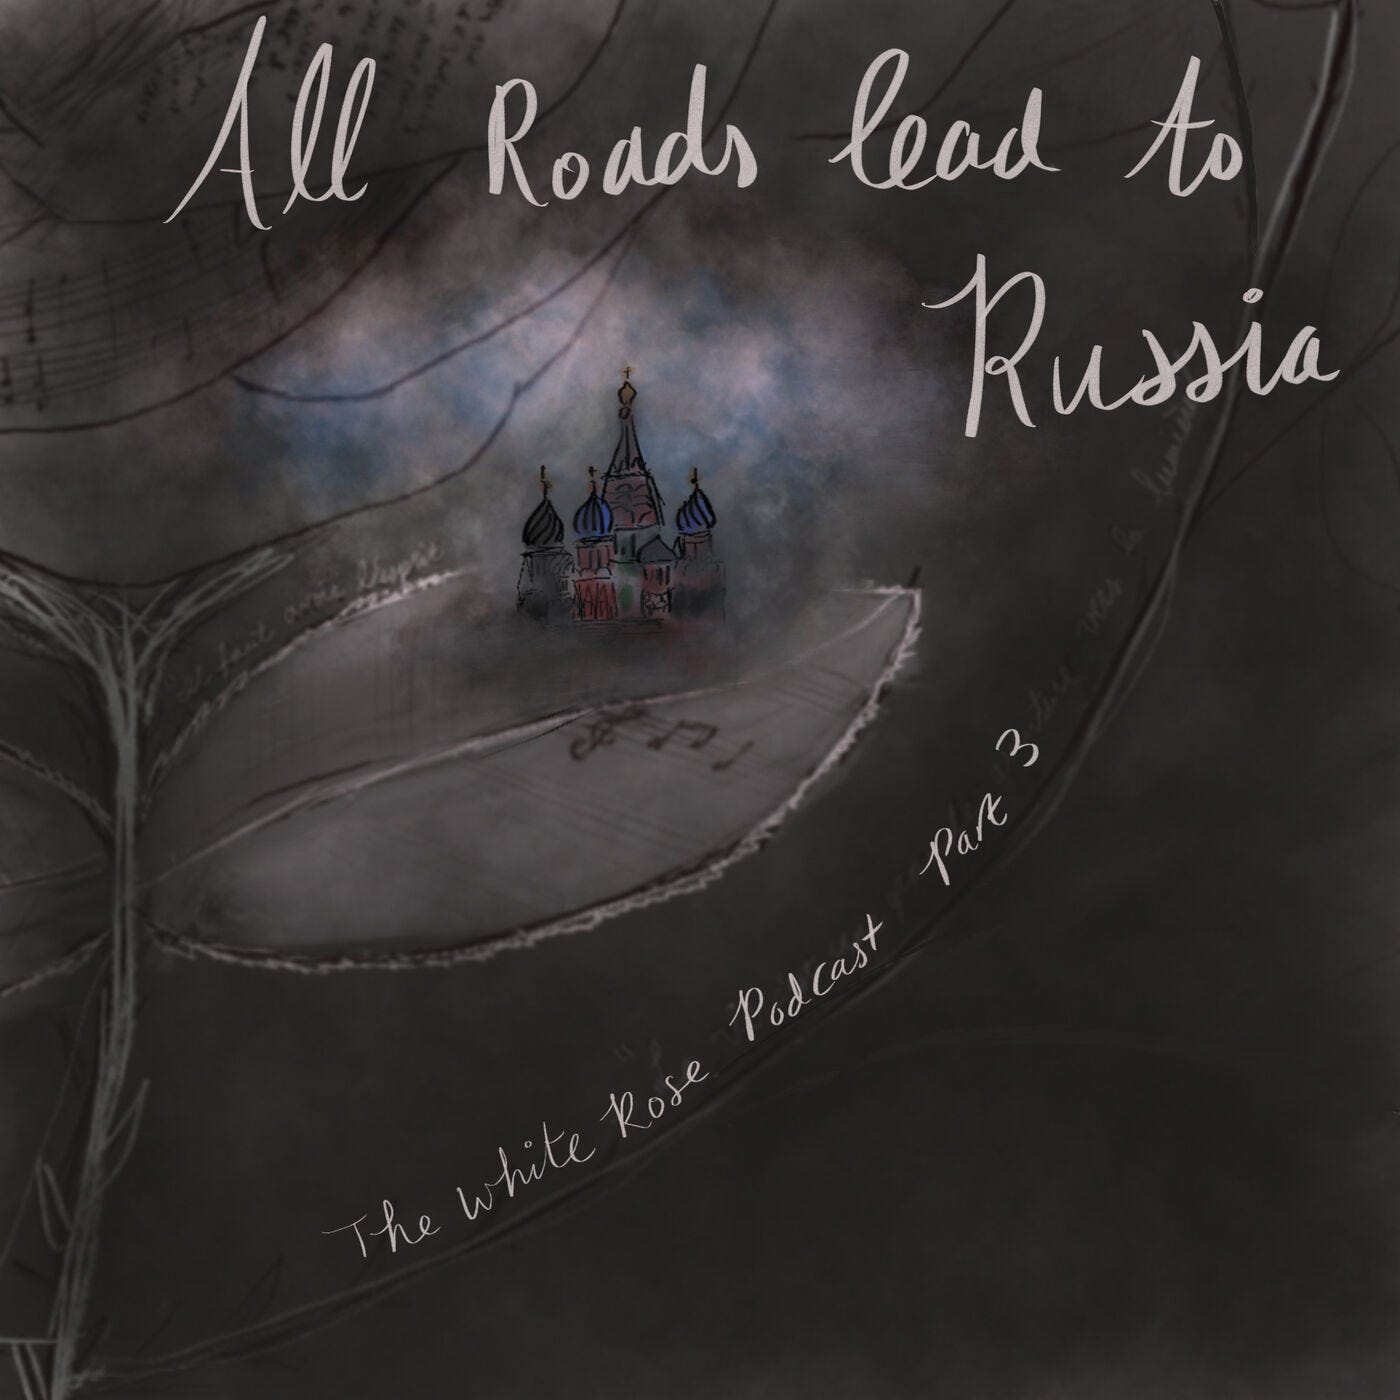 Part 3: All roads lead to Russia